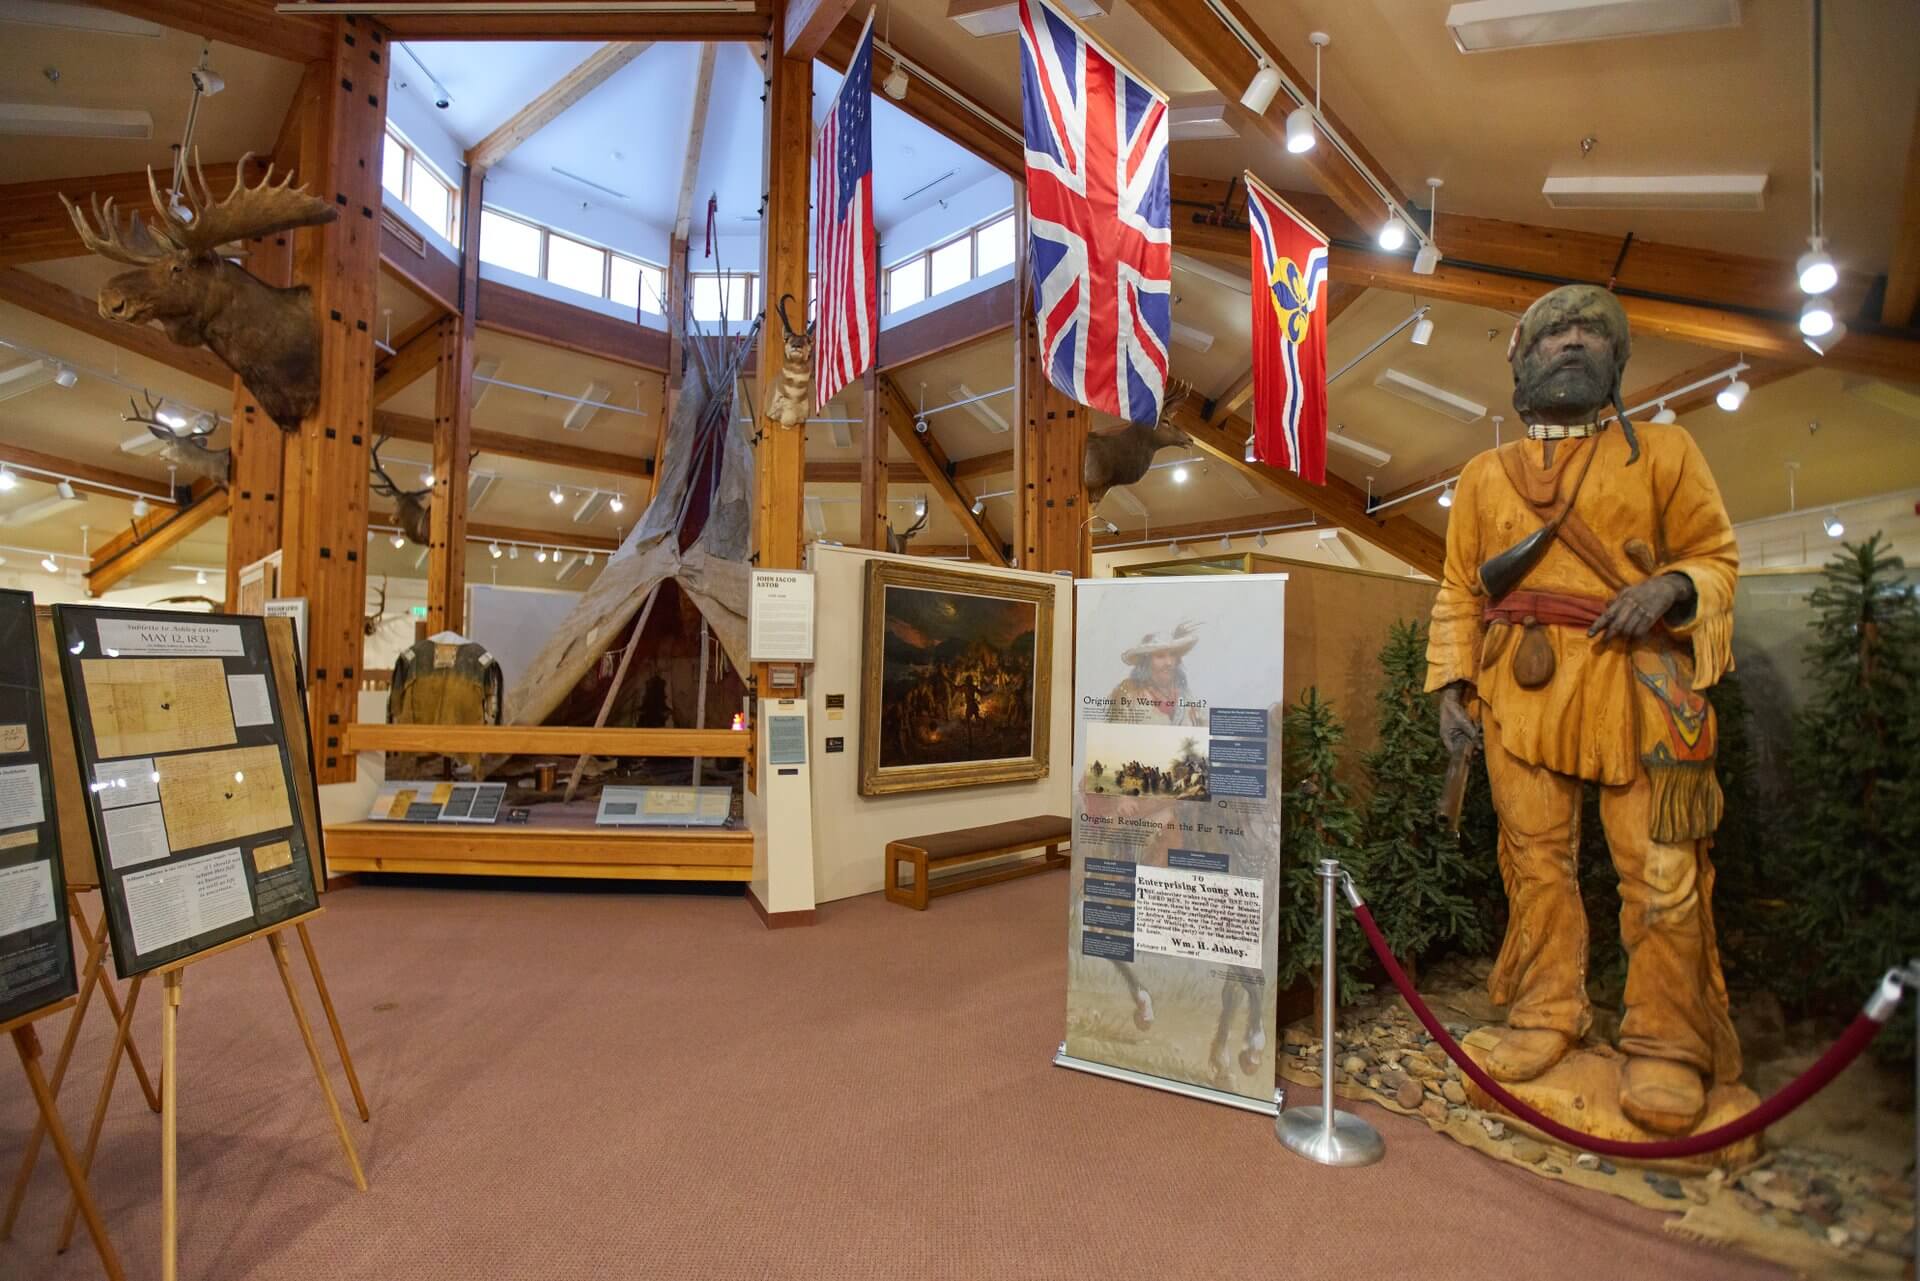 A view of the exhibits and flags inside of the Museum of the Mountain Man.